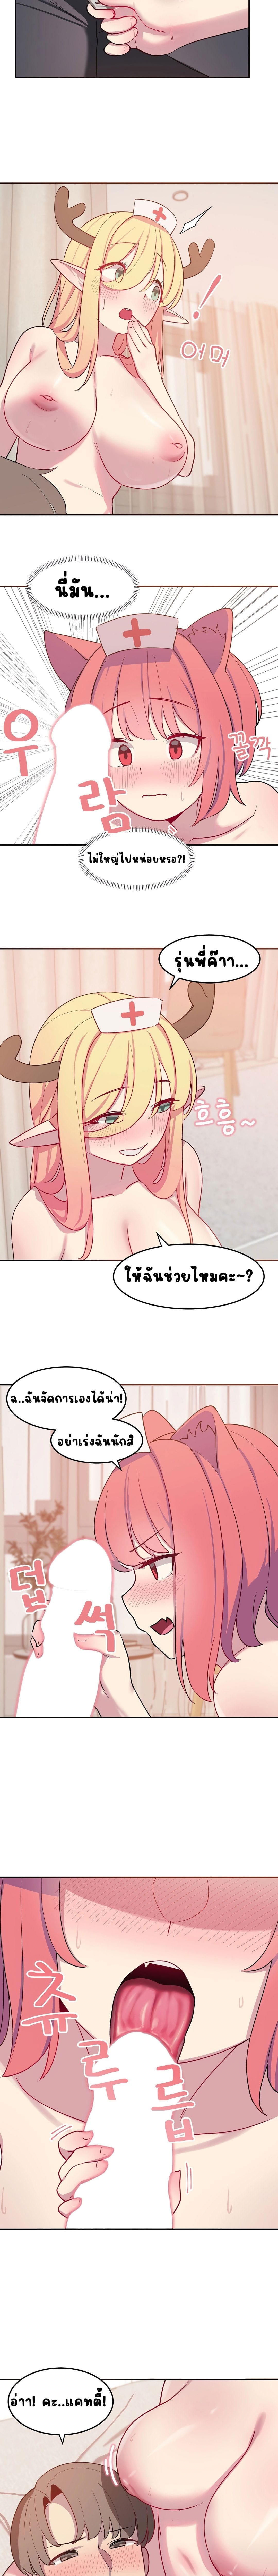 Hospitalized Life in Another World ตอนที่ 2 ภาพ 3